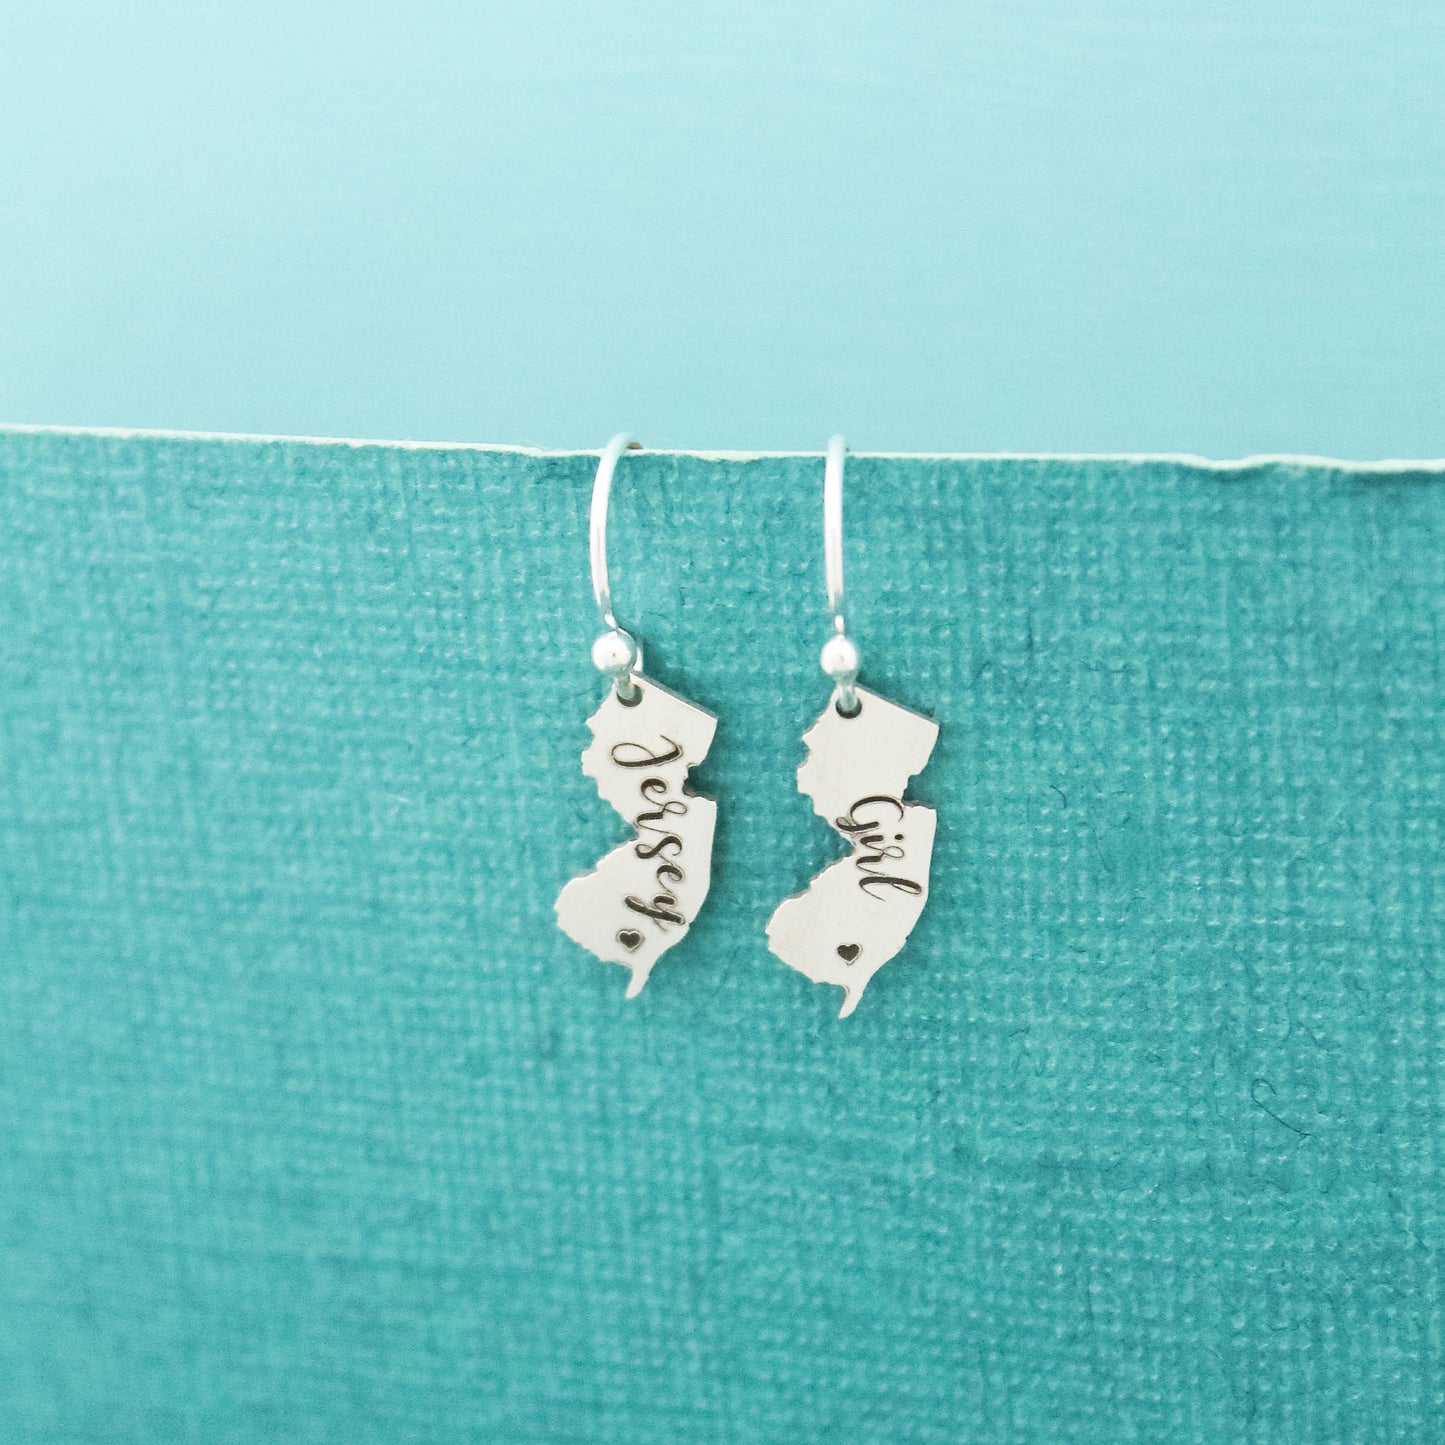 Cute Jersey Girl Earrings, Sterling Silver Jersey Girl Earrings, Jersey Girl Gift, Jersey Girl Jewelry, Gifts for Her, New Jersey Gi